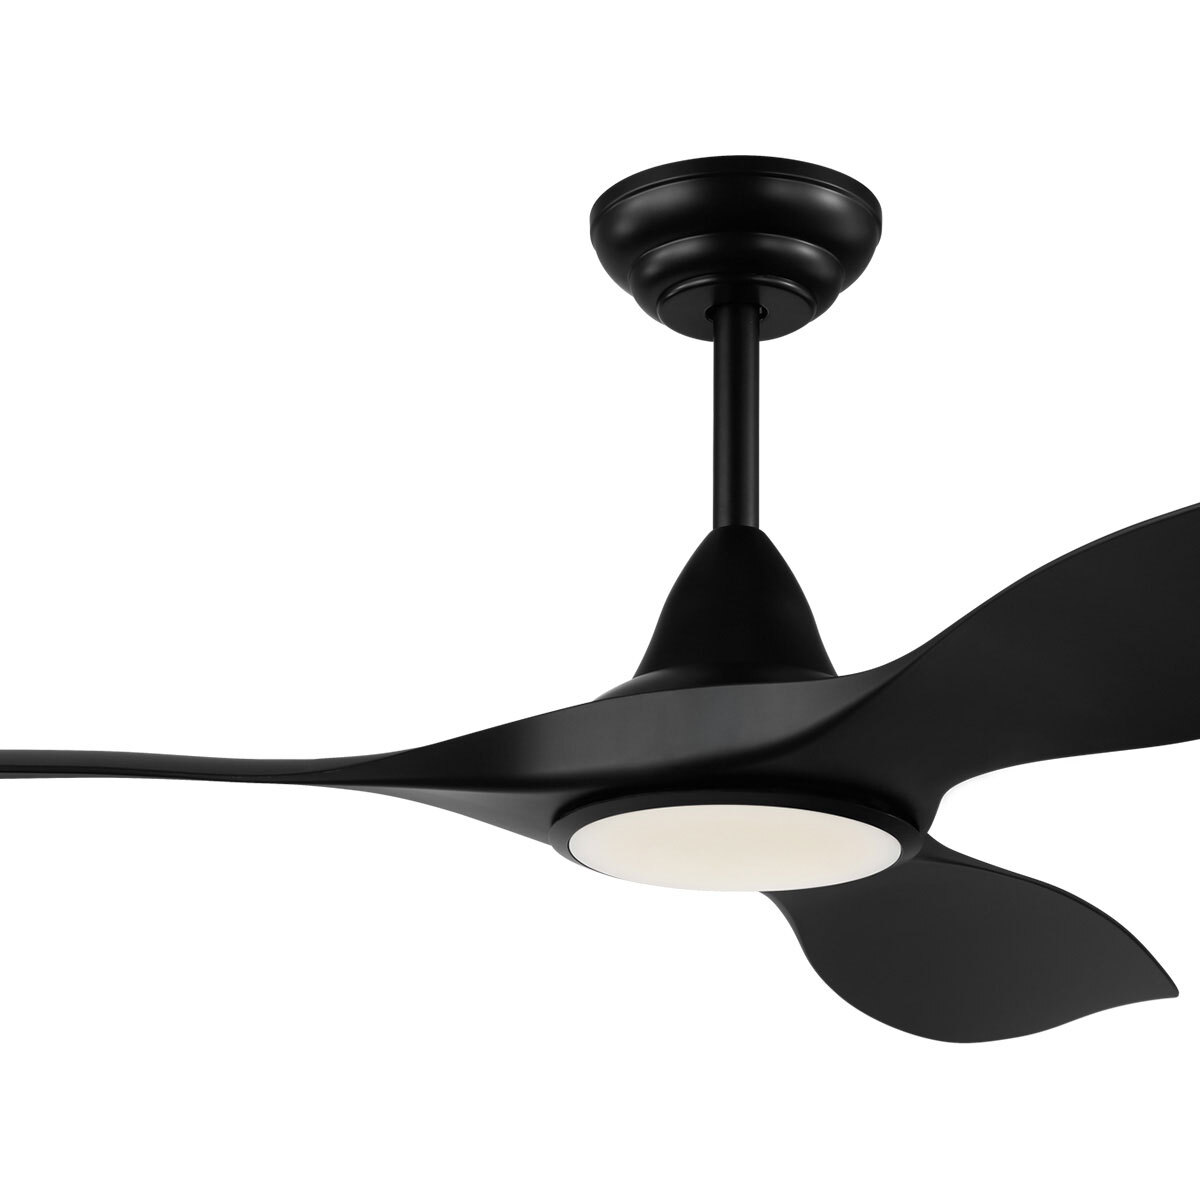 Eglo Cirali 3 Blade (132cm) Indoor Ceiling Fan with DC Motor, LED Light and Remote Control, available in 2 Colours